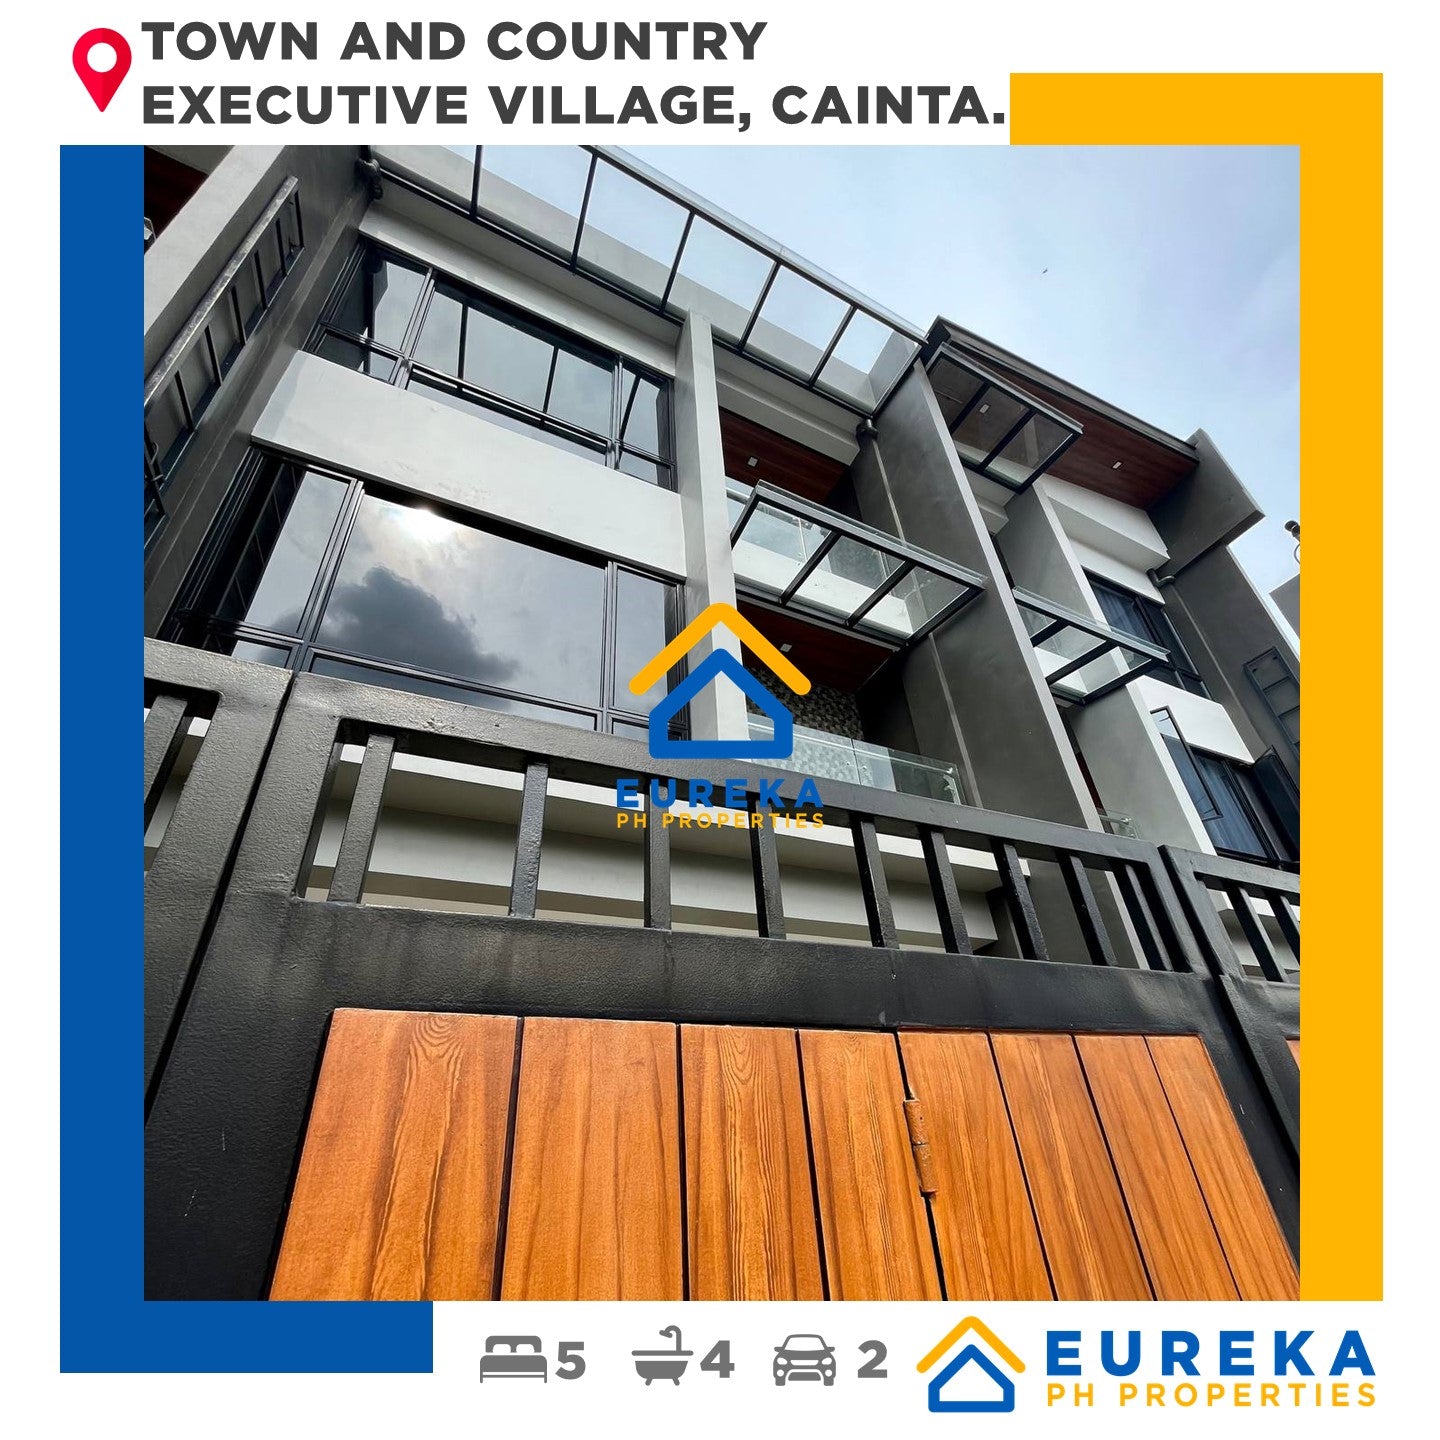 Brand new 3 storey modern townhouse in Town and Country Executive Village, Cainta Rizal.